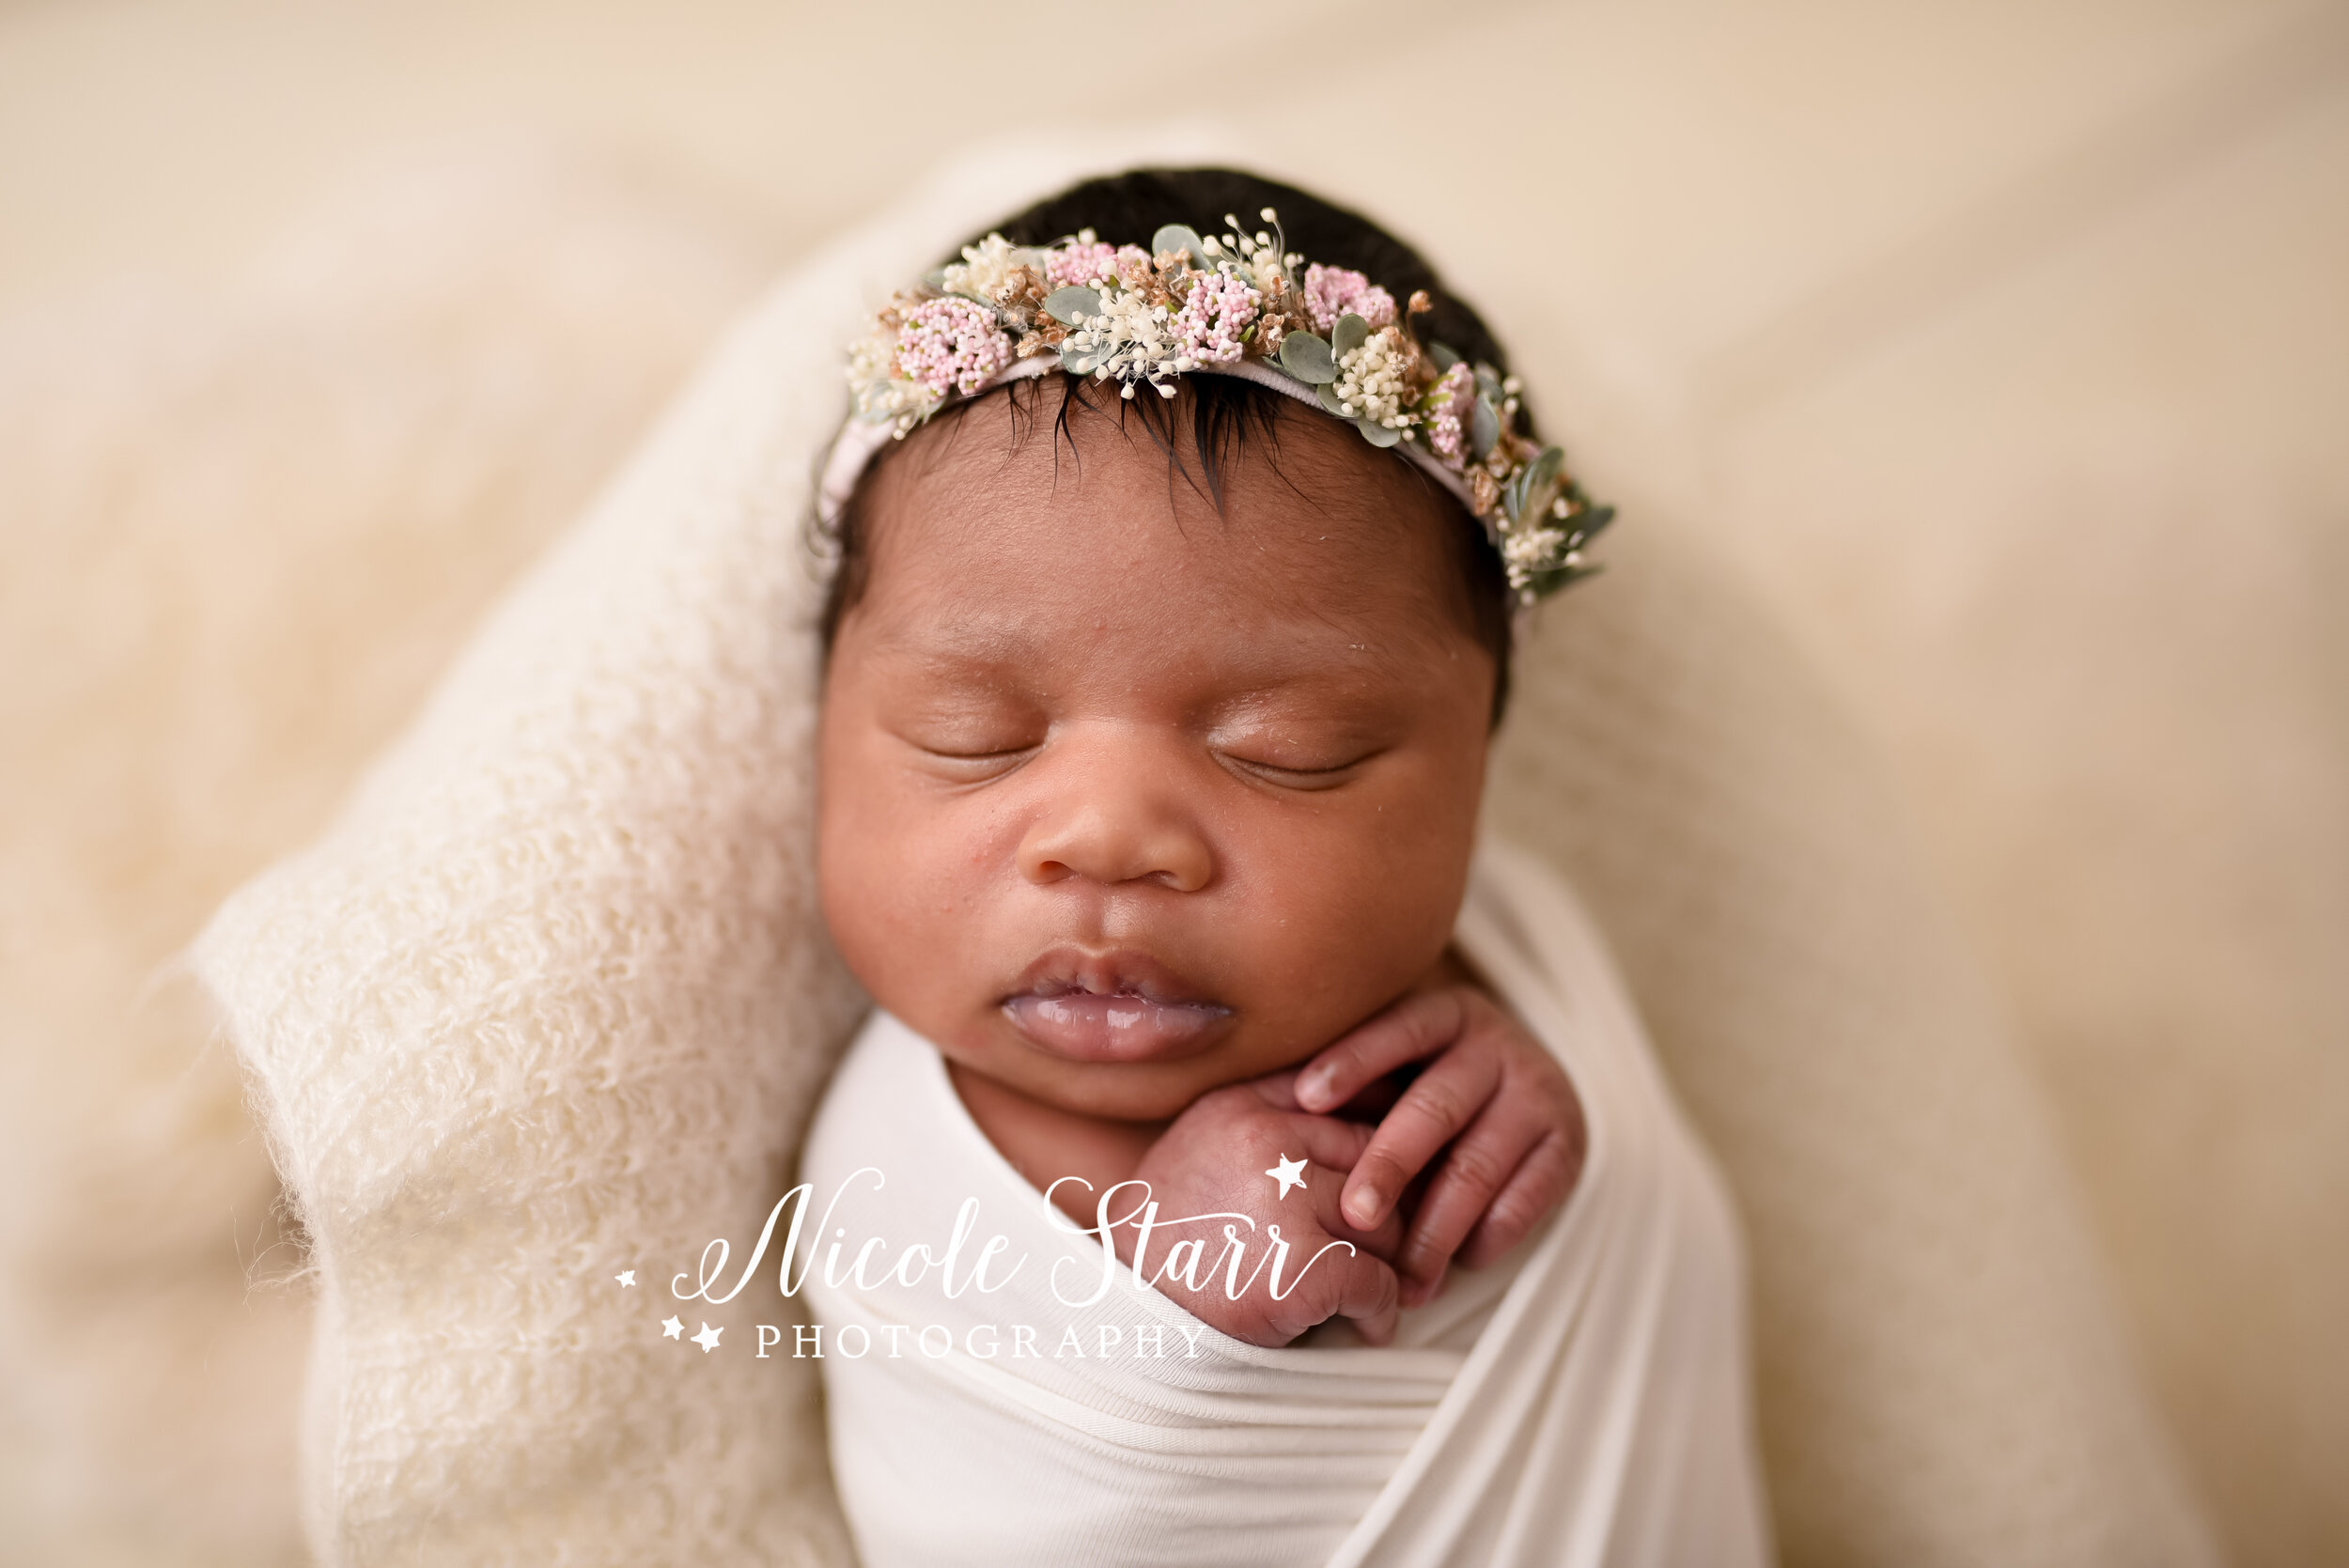 Floral Crowns and Lace - Gorgeous Newborn Portraits for a Baby